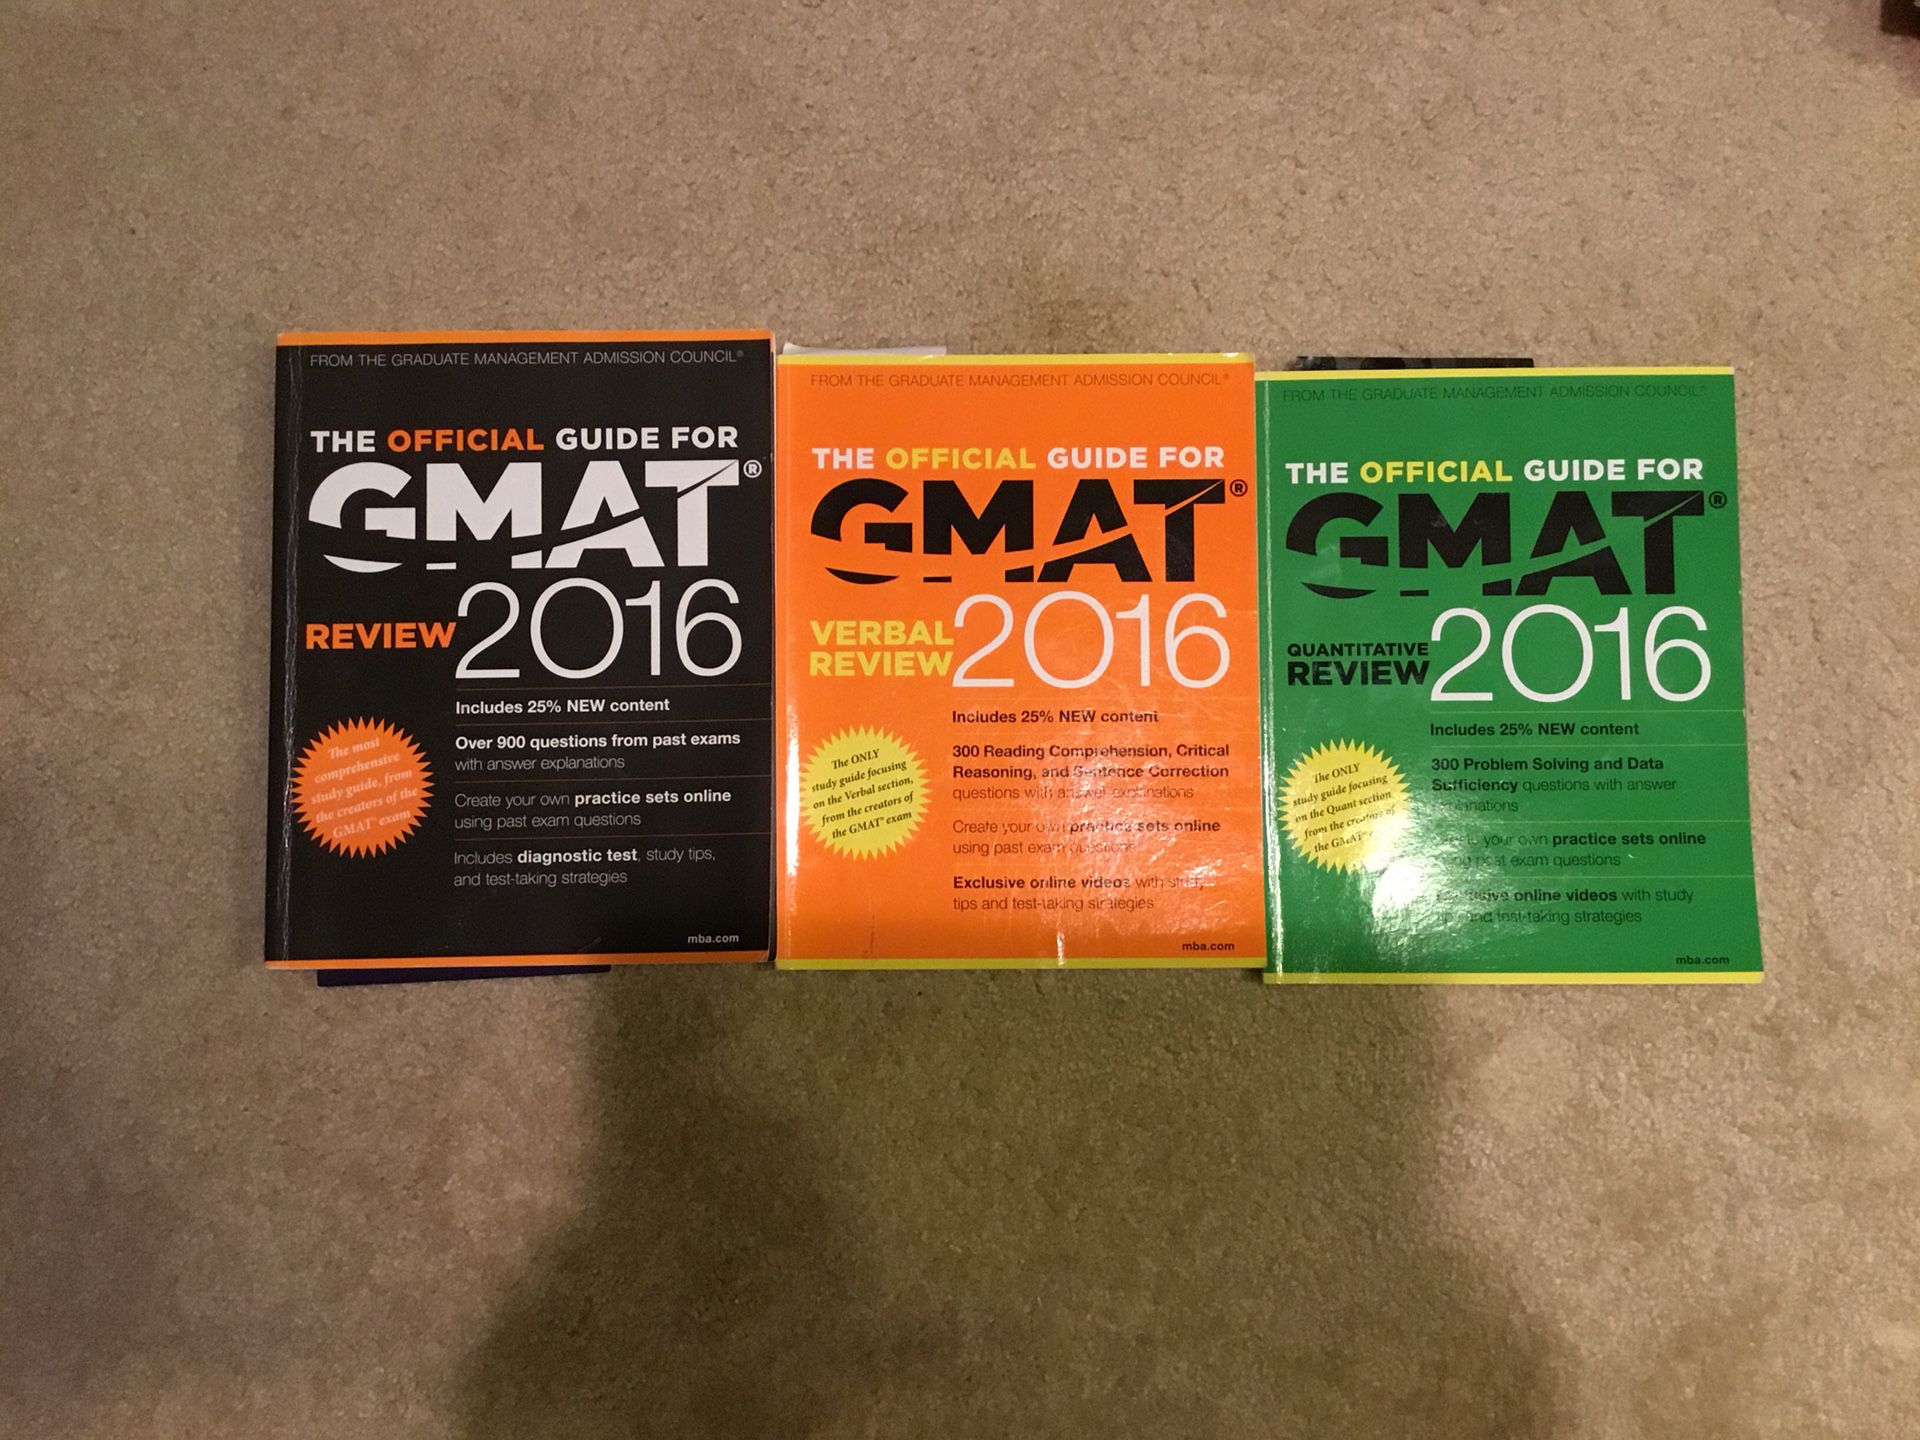 GMAT OFFICIAL GUIDE 2016